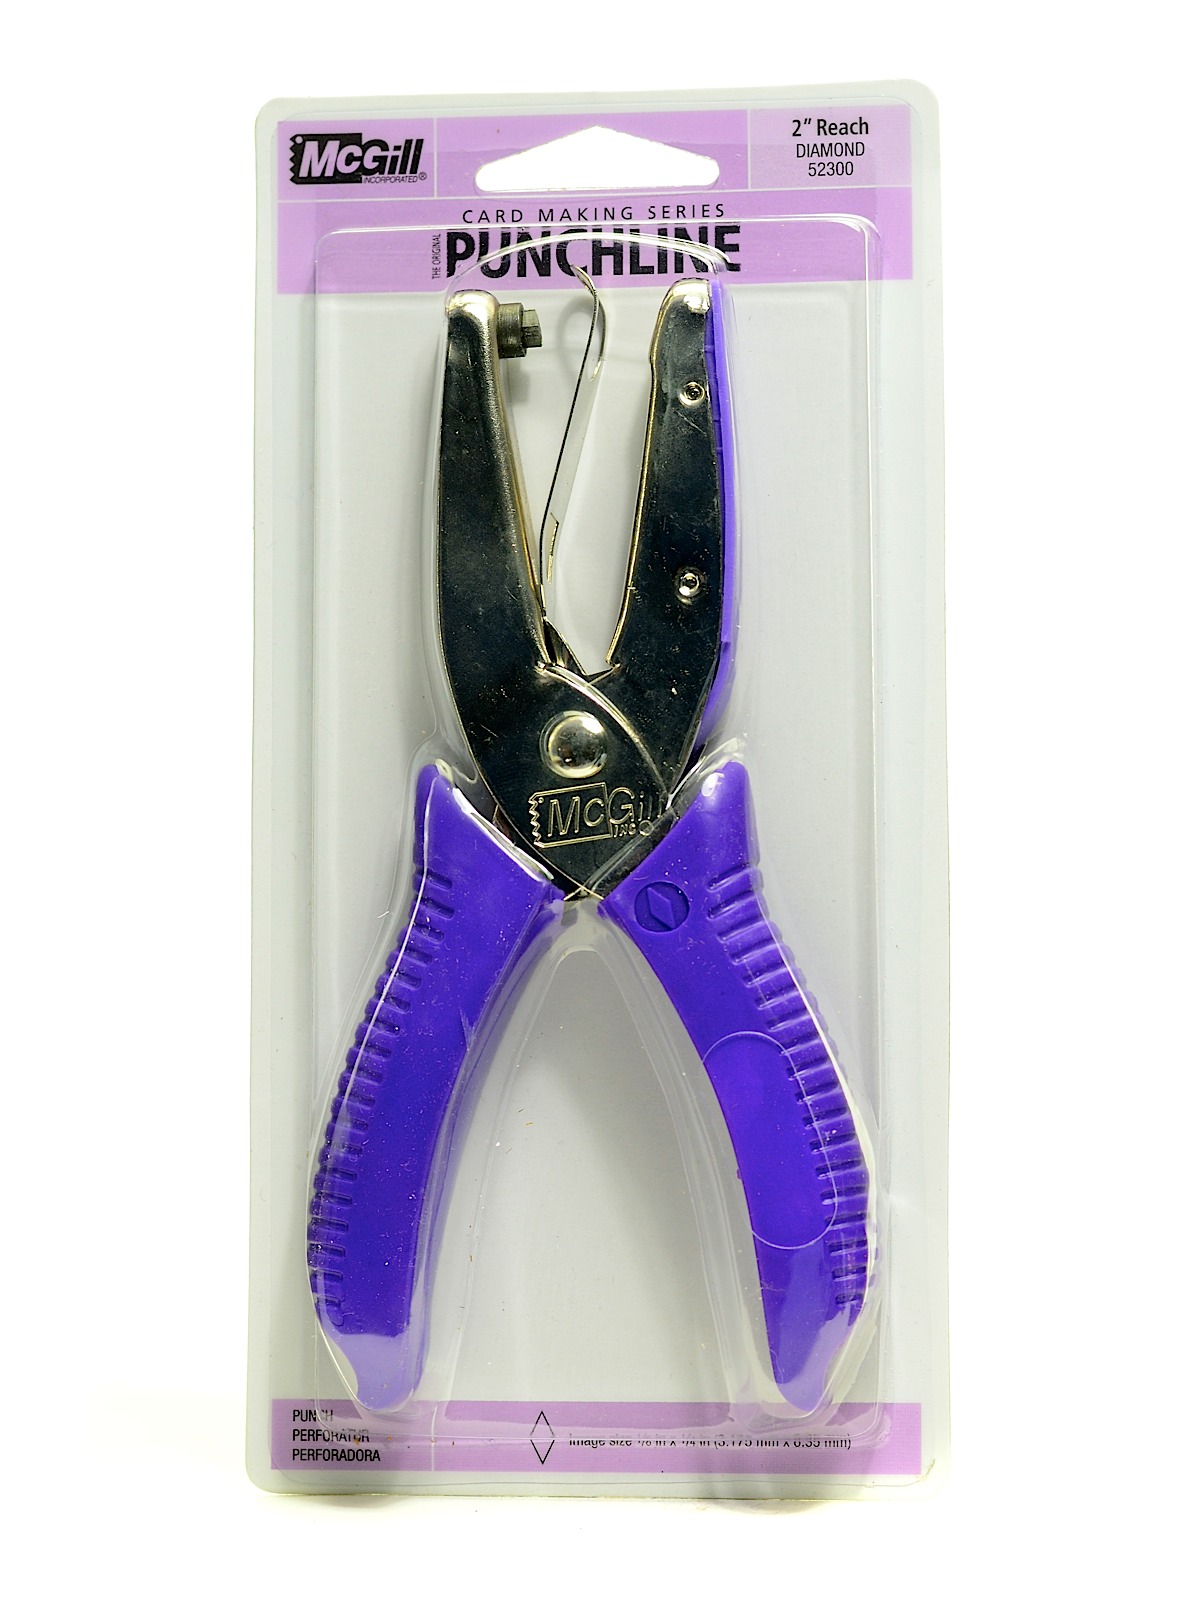 Punchline Hand-held Punches Diamond 5 16 In. 2 In. Reach